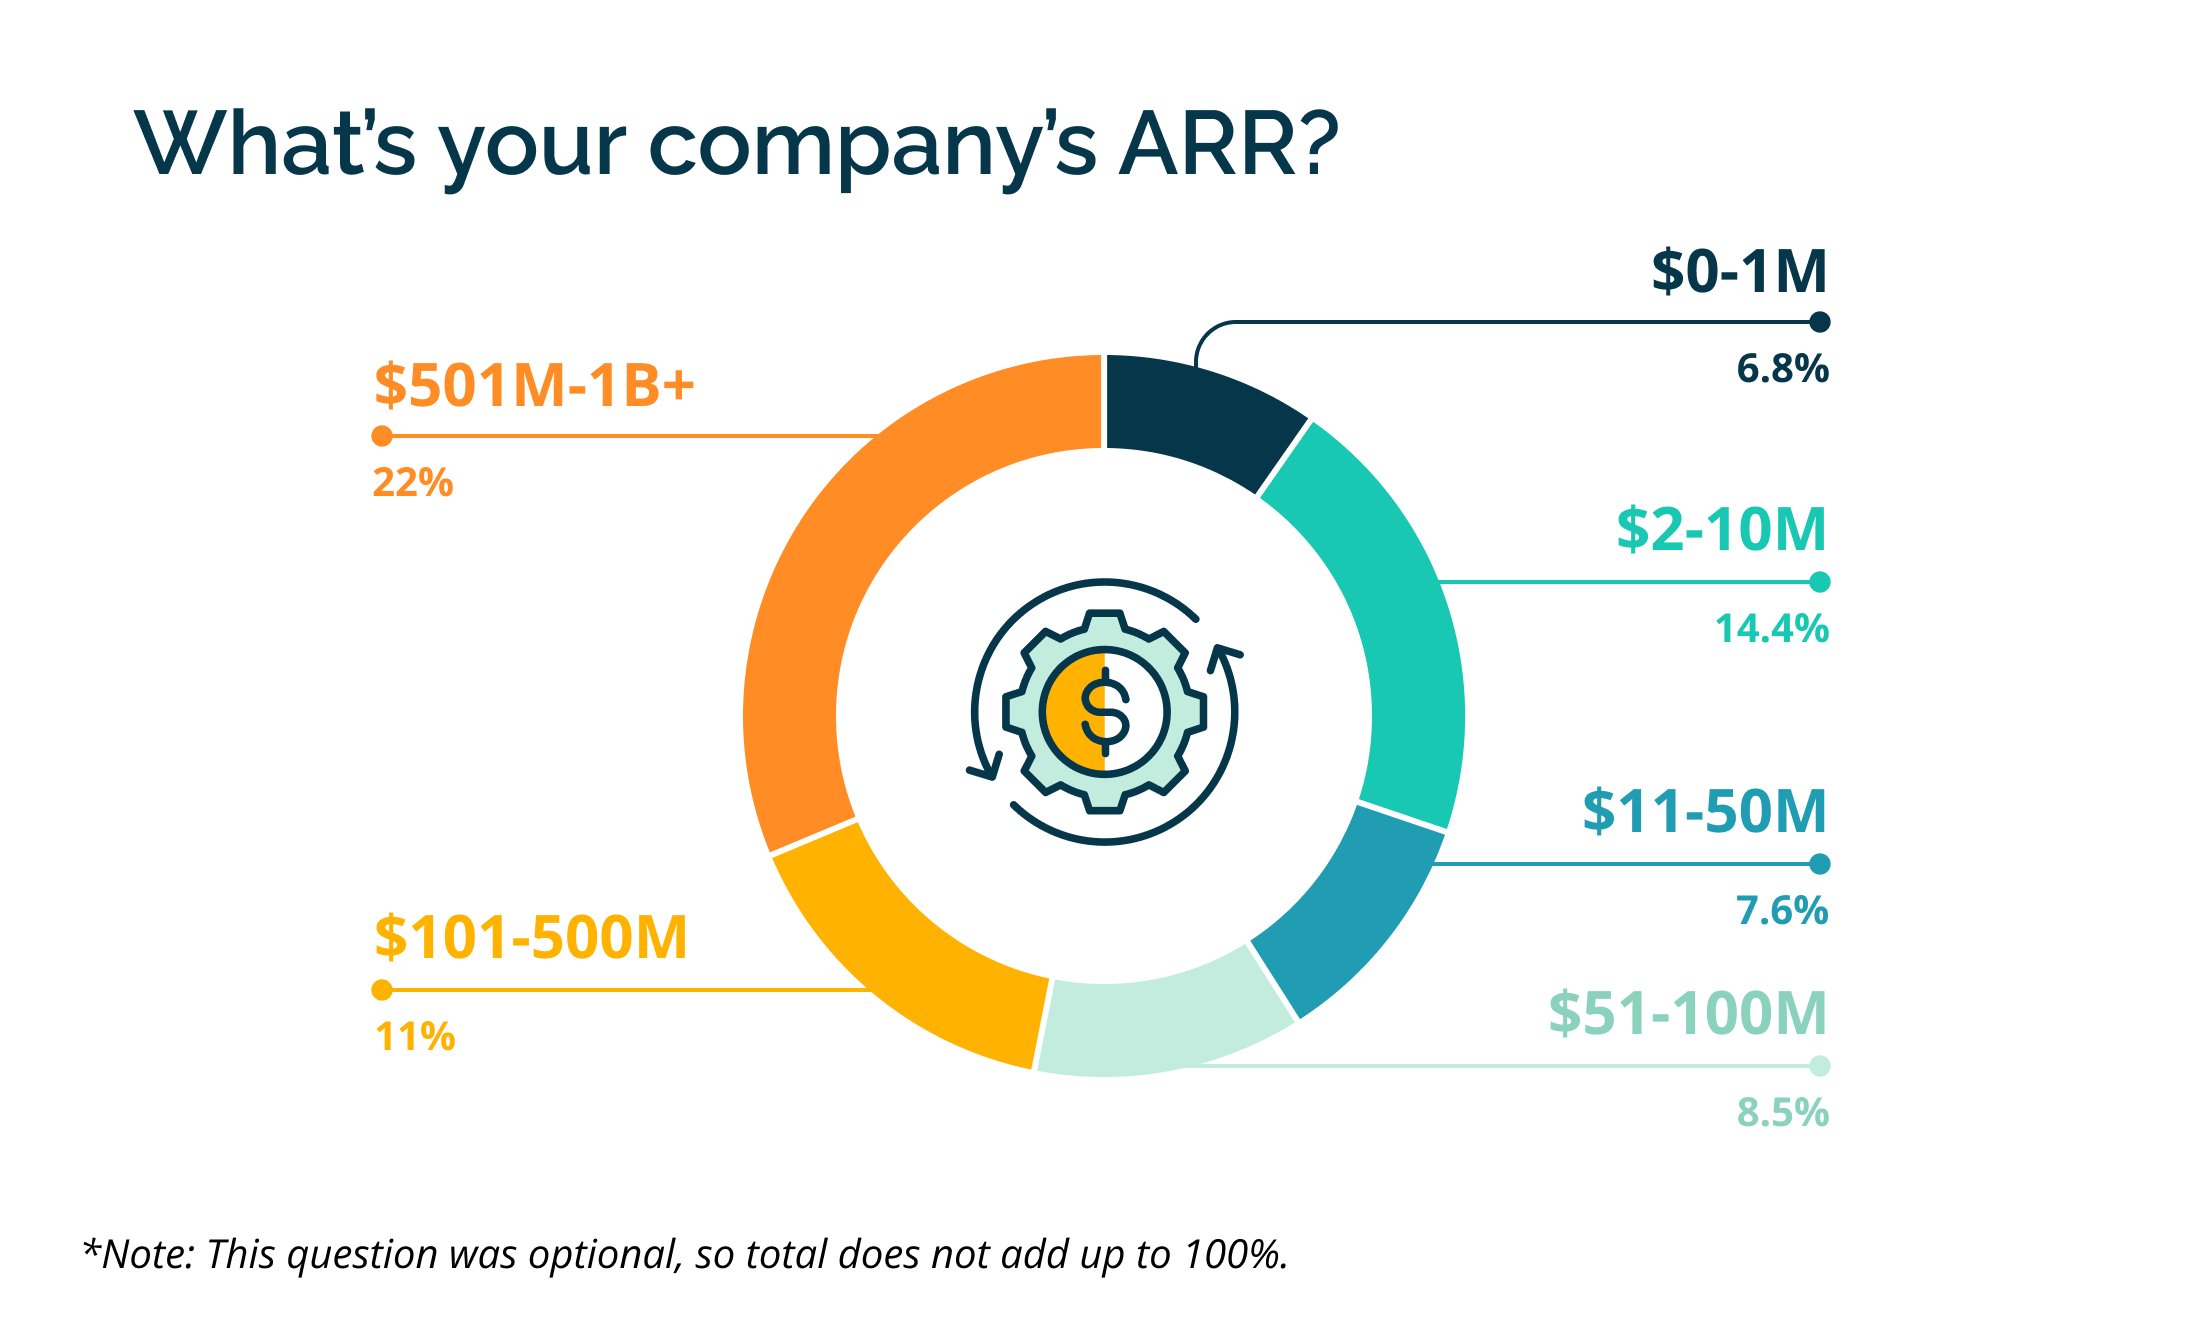 Results of companies ARR percentages